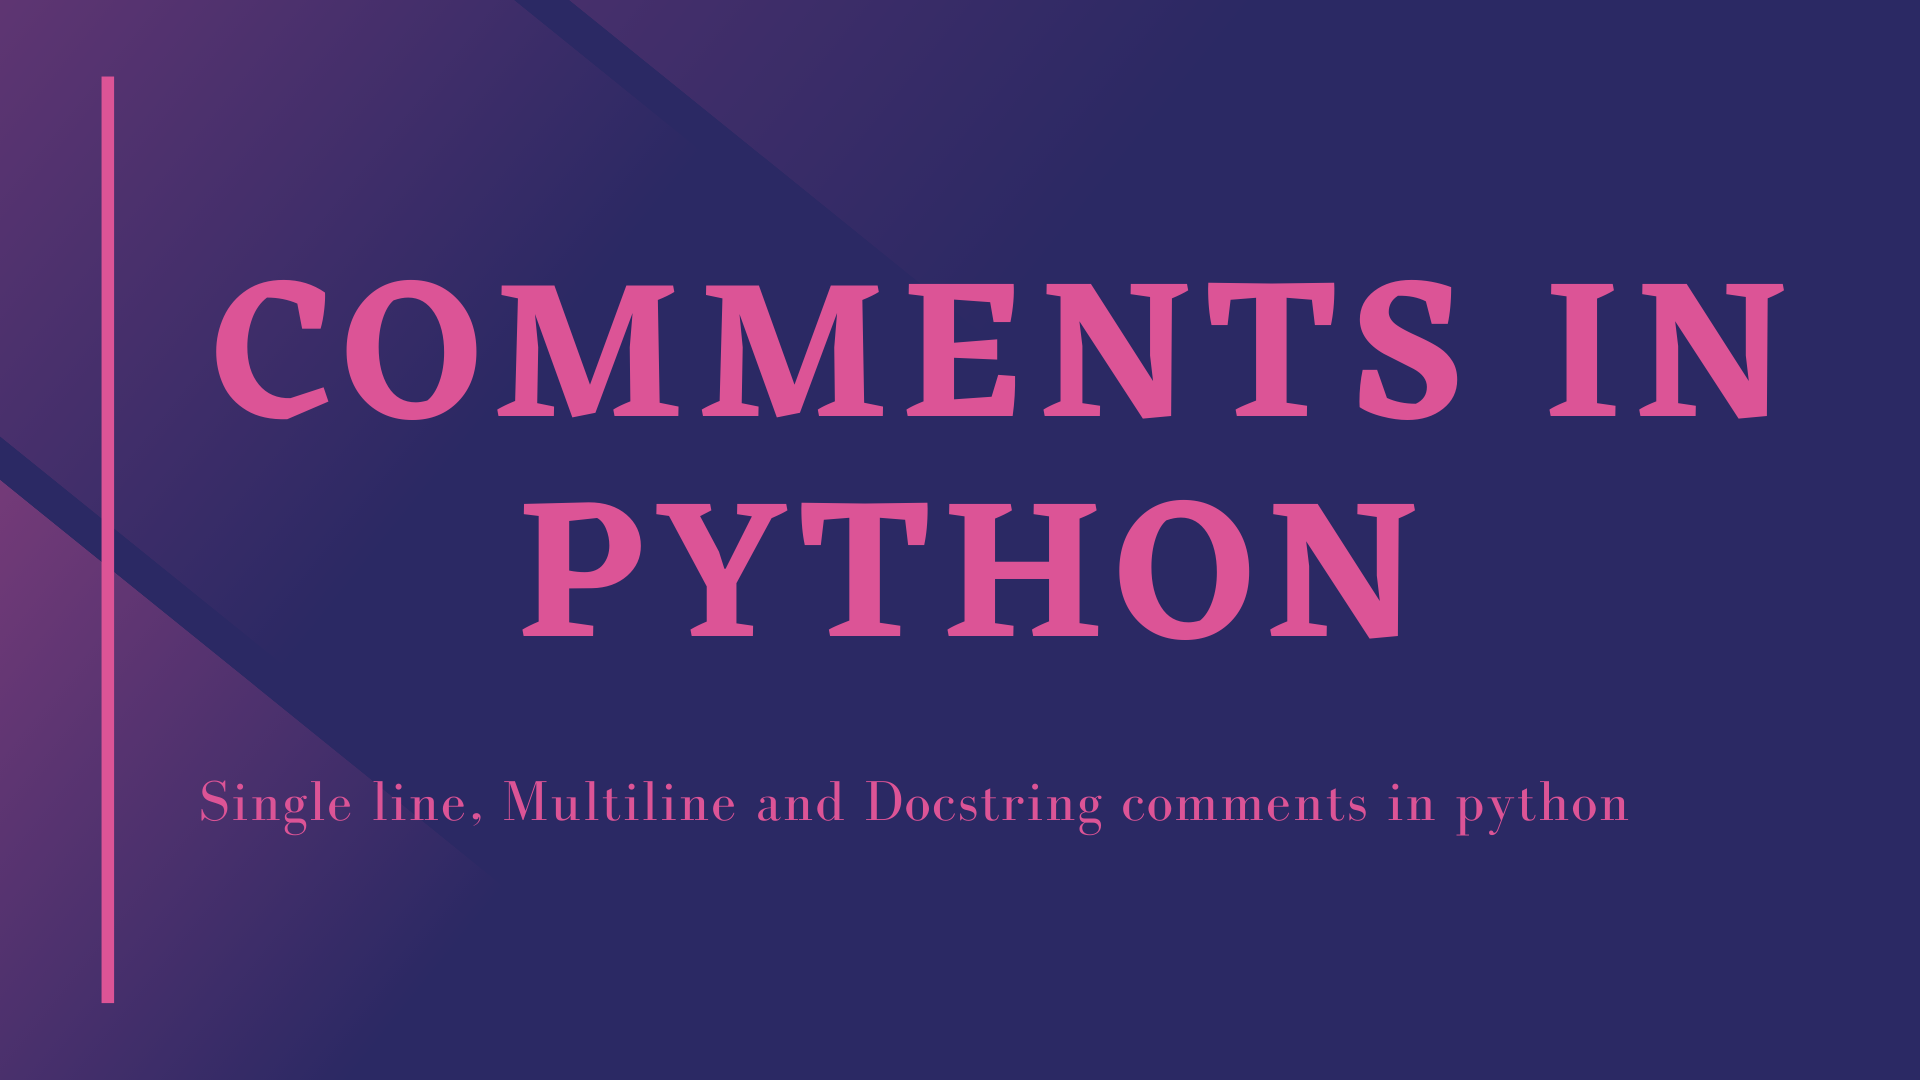 Comments in python